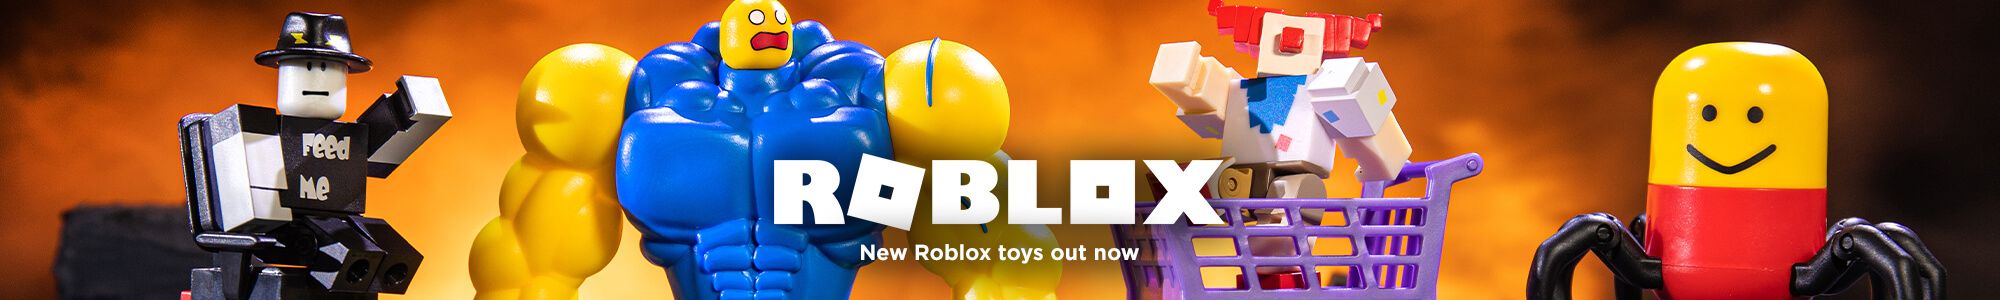 Roblox Roblox Toys Figures The Entertainer - murder mystery roblox toy animation